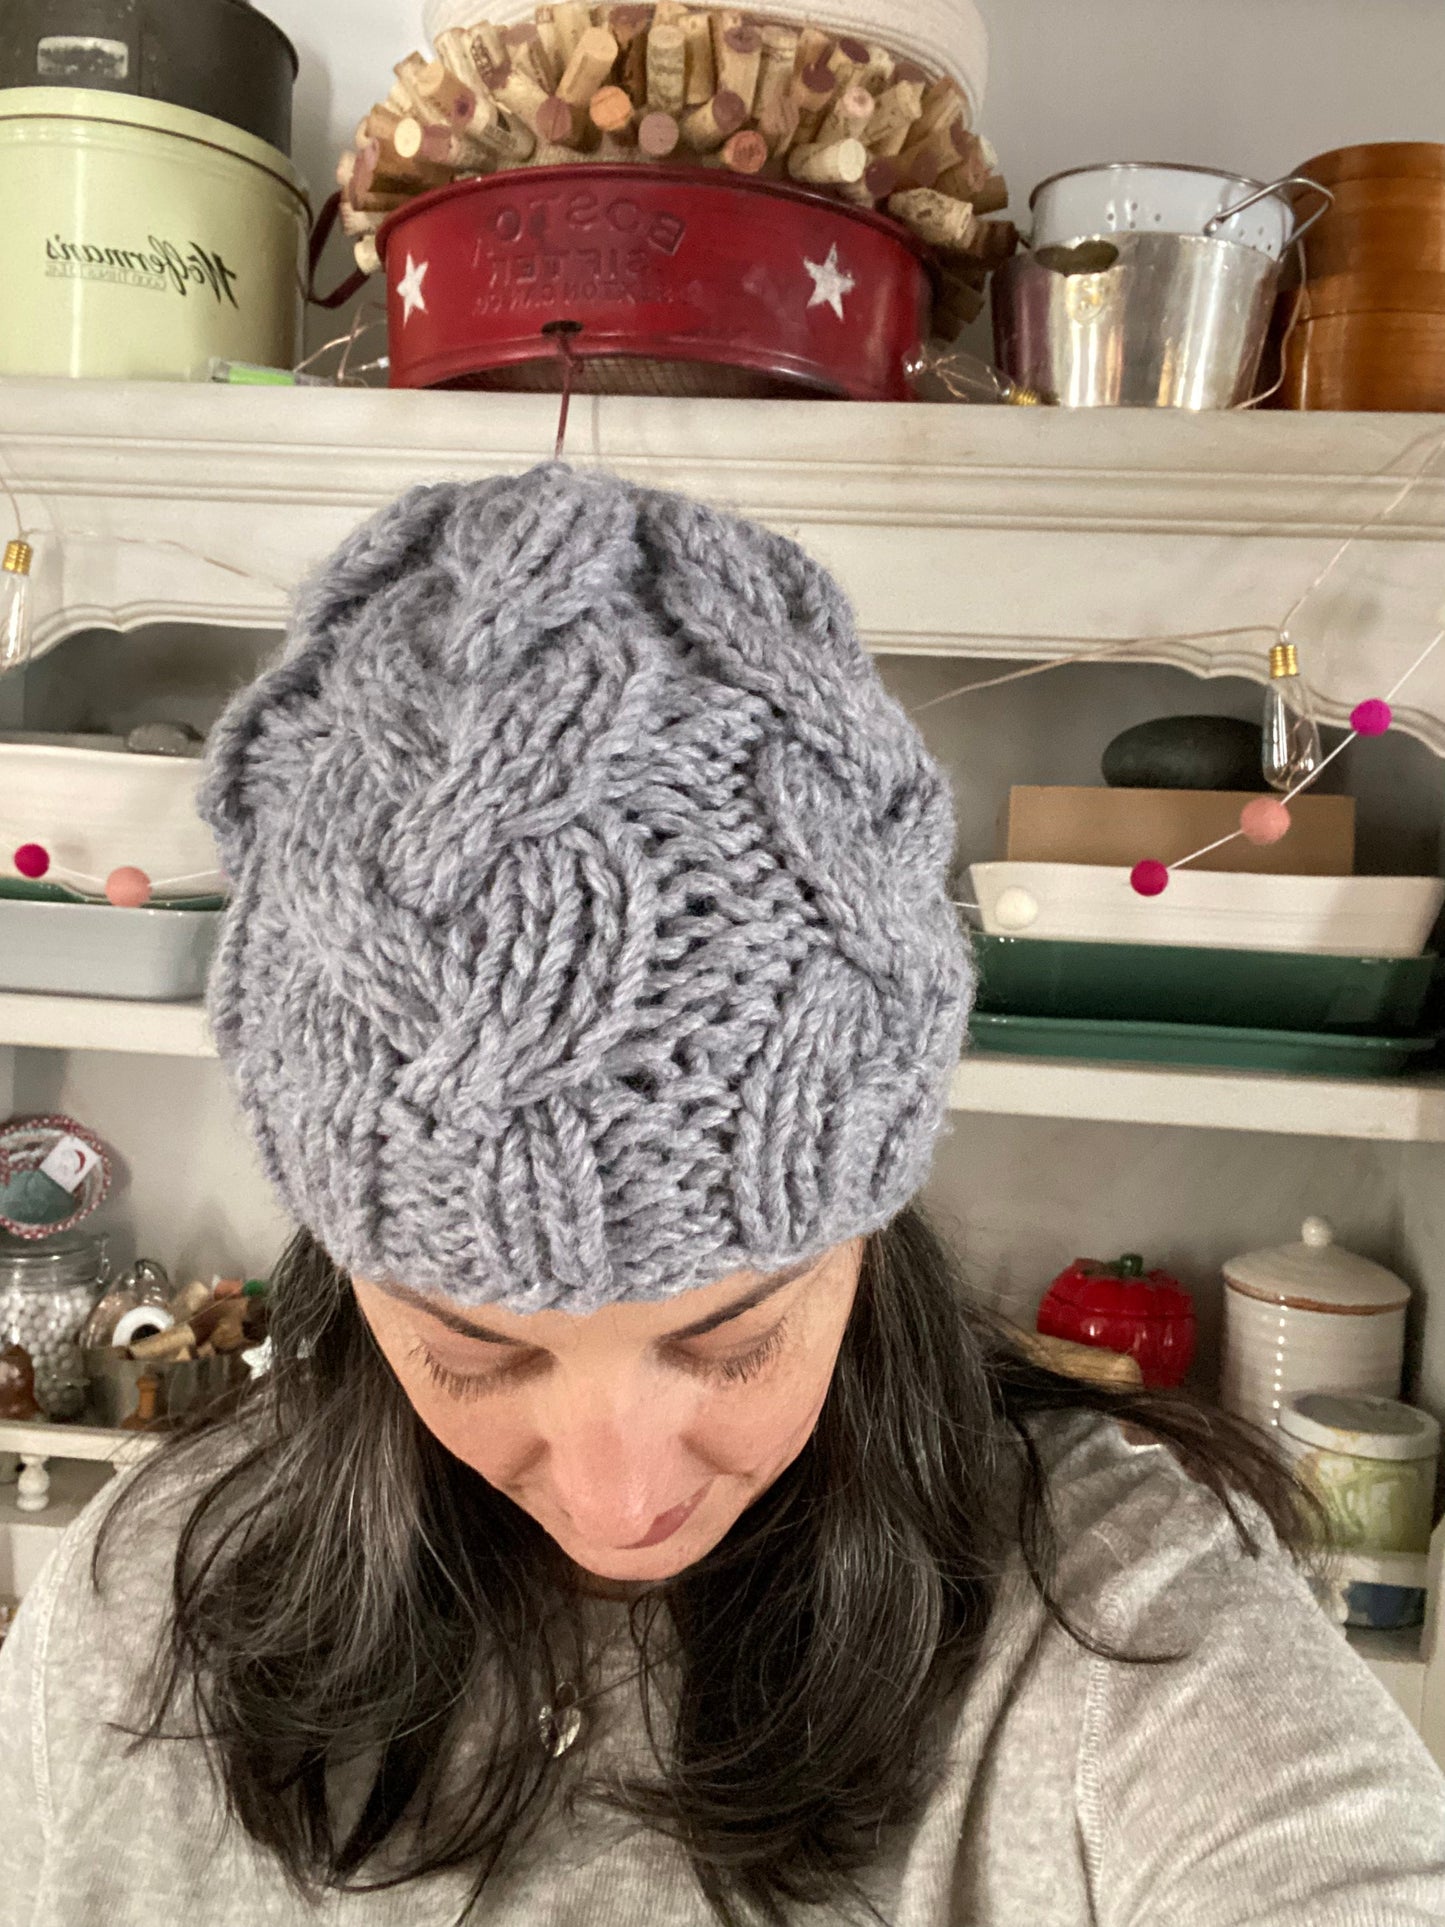 Cozy Cables Hat - Wool Blend Fiber in Night Sky